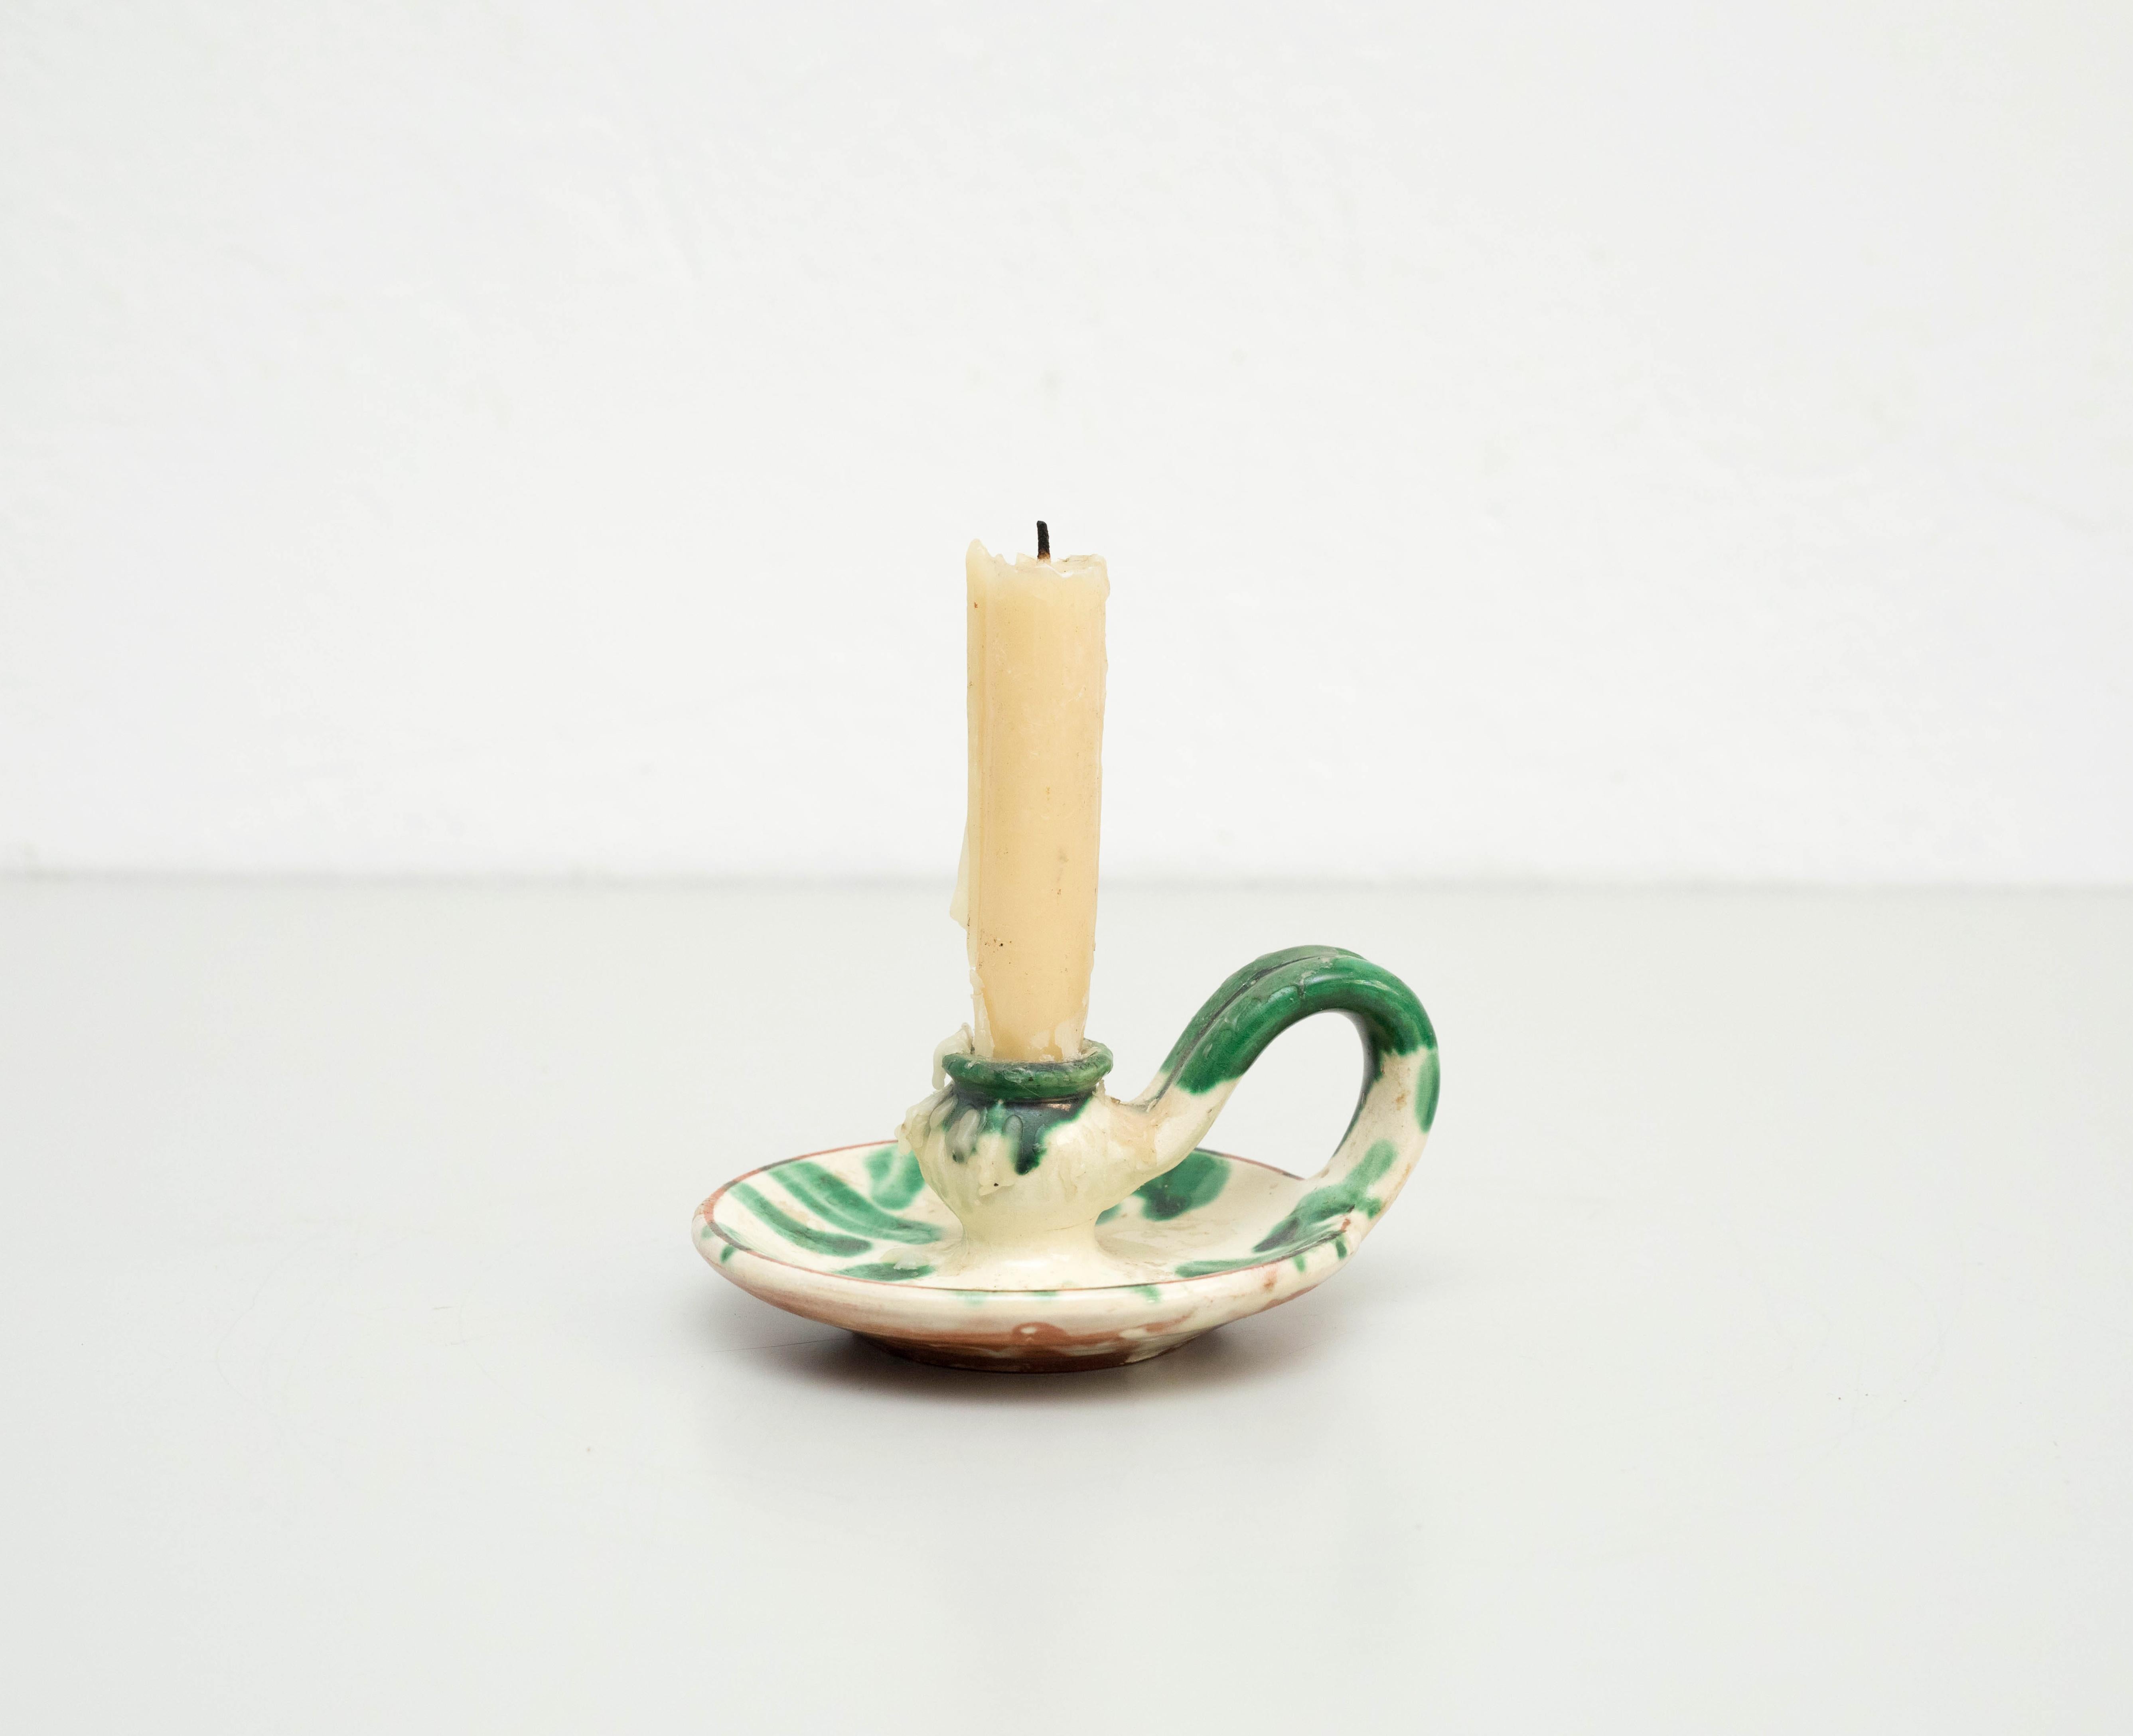 Rustic ceramic candle holder, circa 1960
By Unknown manufacturer. Spain.
In original condition, with minor wear consistent with age and use, preserving a beautiful patina.

Materials:
Ceramic.
 
Candle not included.